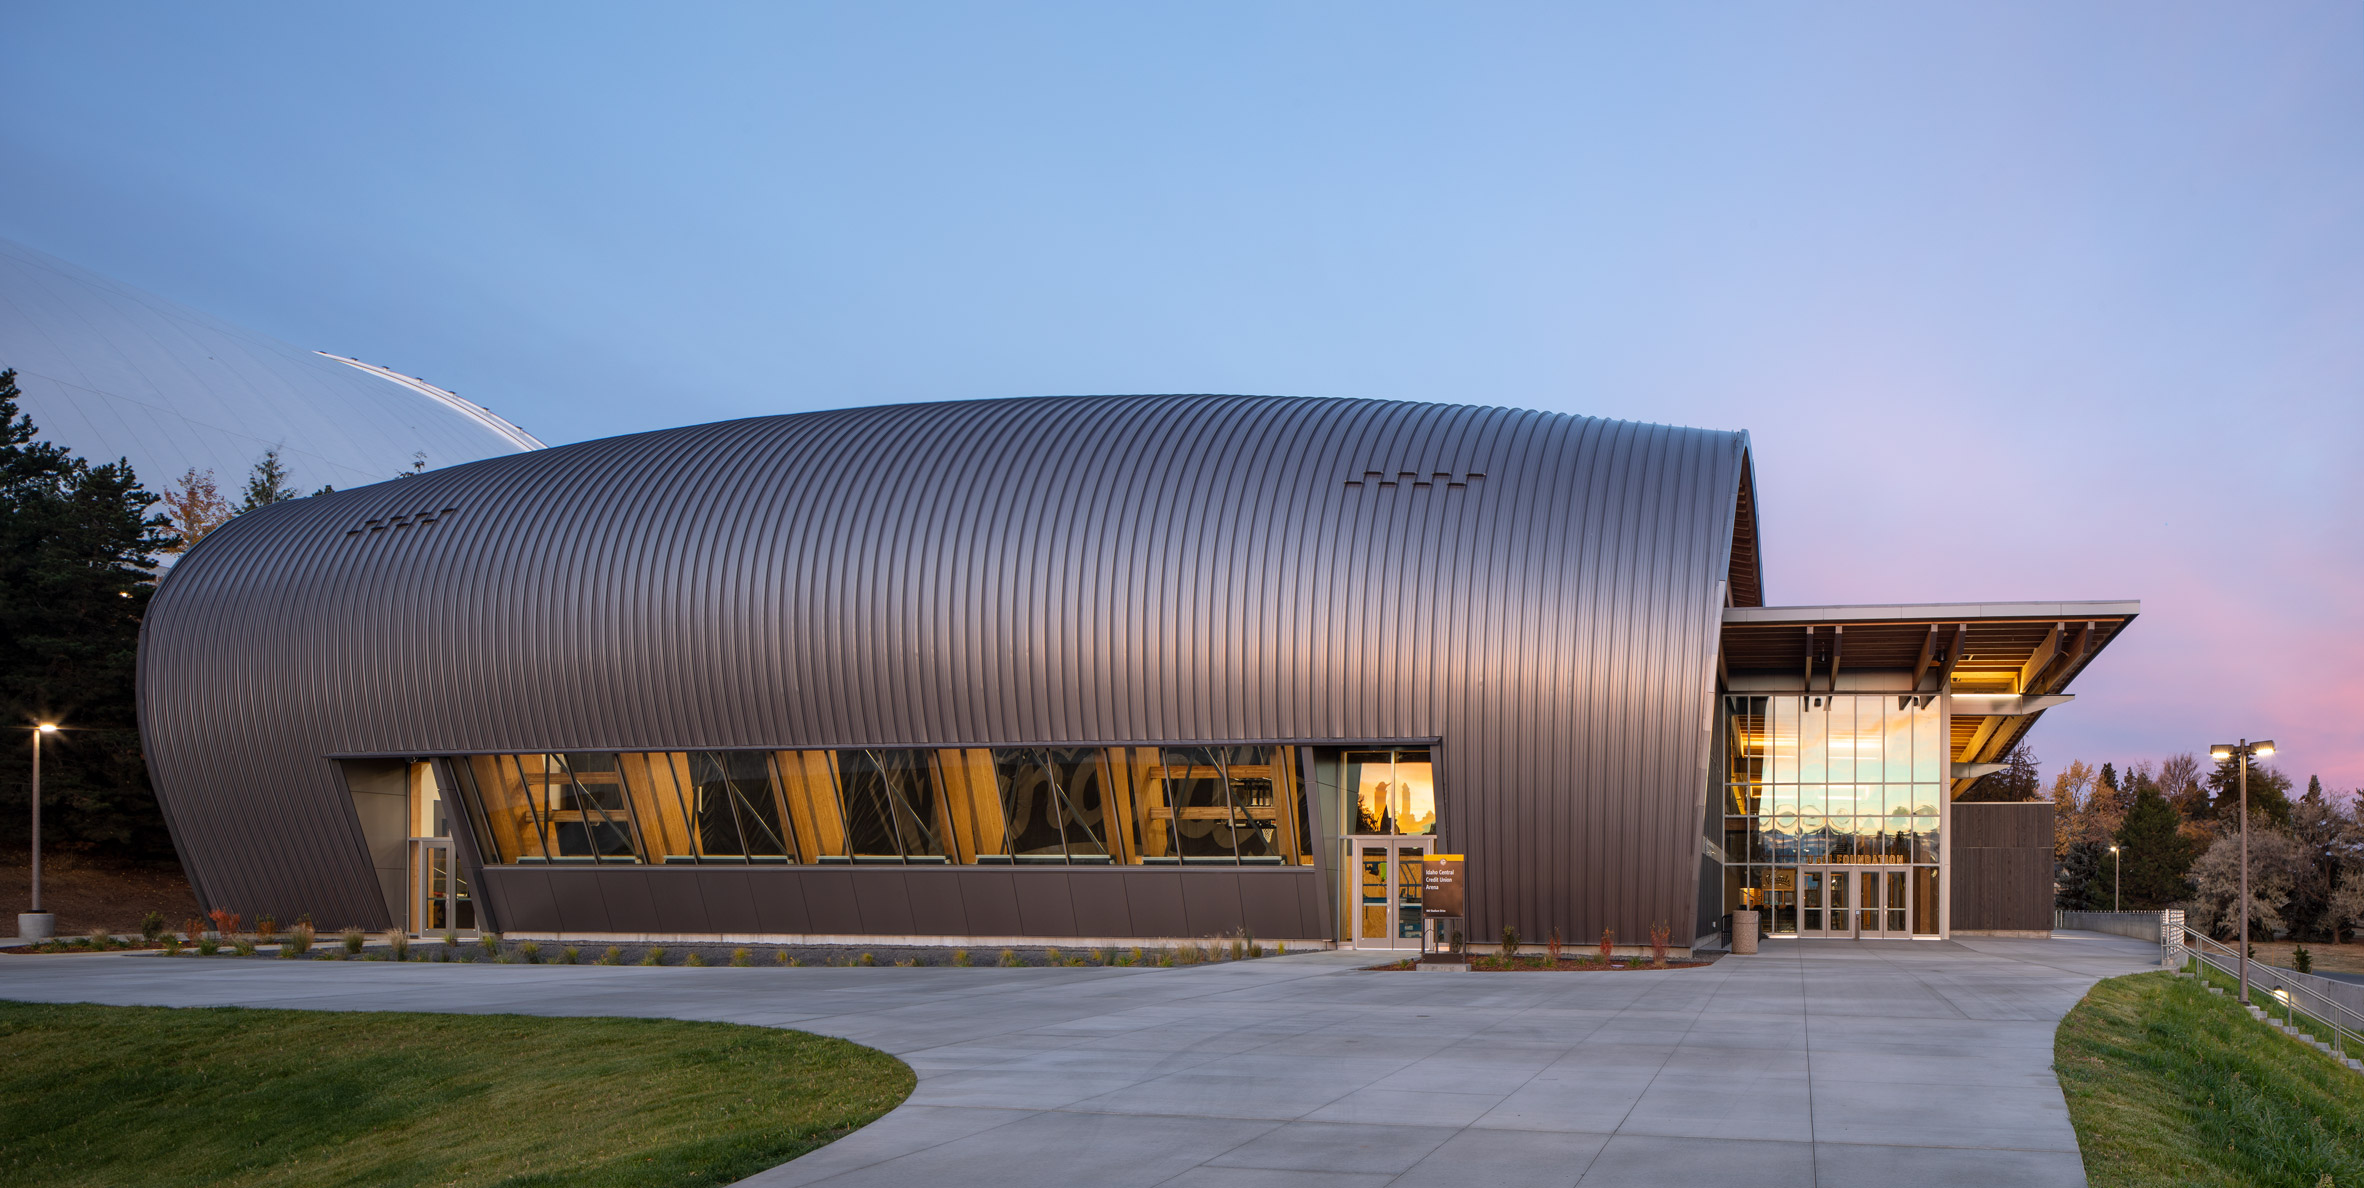 Idaho Central Credit Union Arena - Opsis Architecture